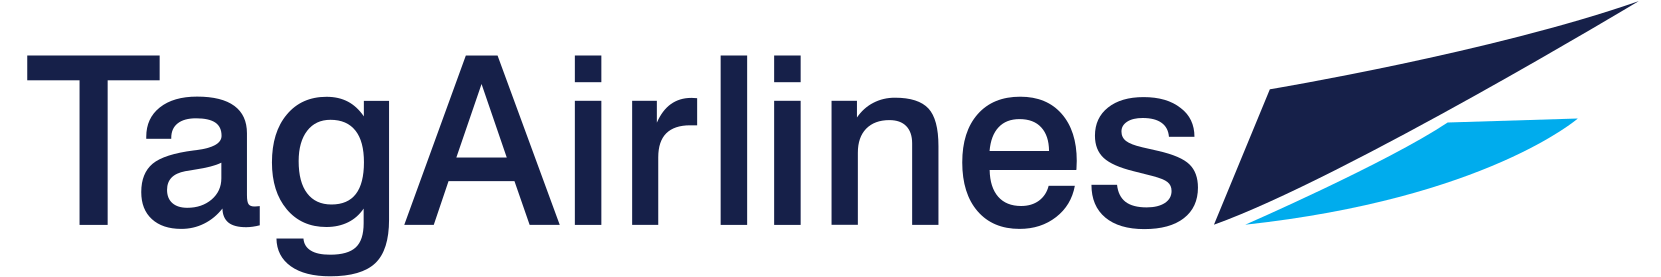 logo-tagairlines